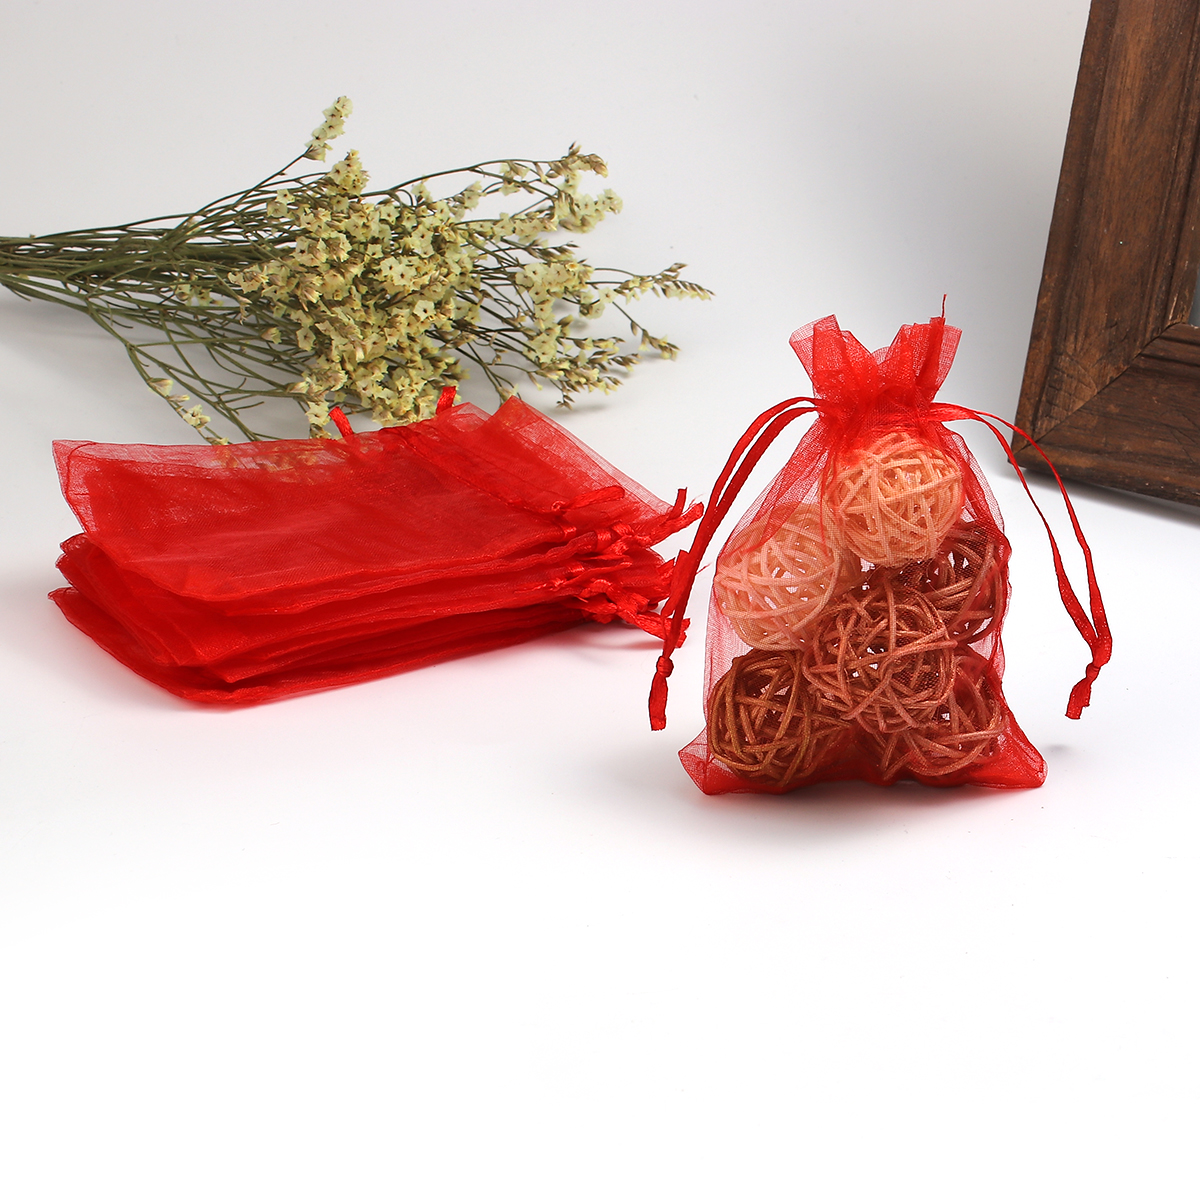 Picture of Wedding Gift Organza Jewelry Bags Drawstring Rectangle Red (Usable Space: 9.5x9cm) 12cm(4 6/8") x 9cm(3 4/8"), 50 PCs